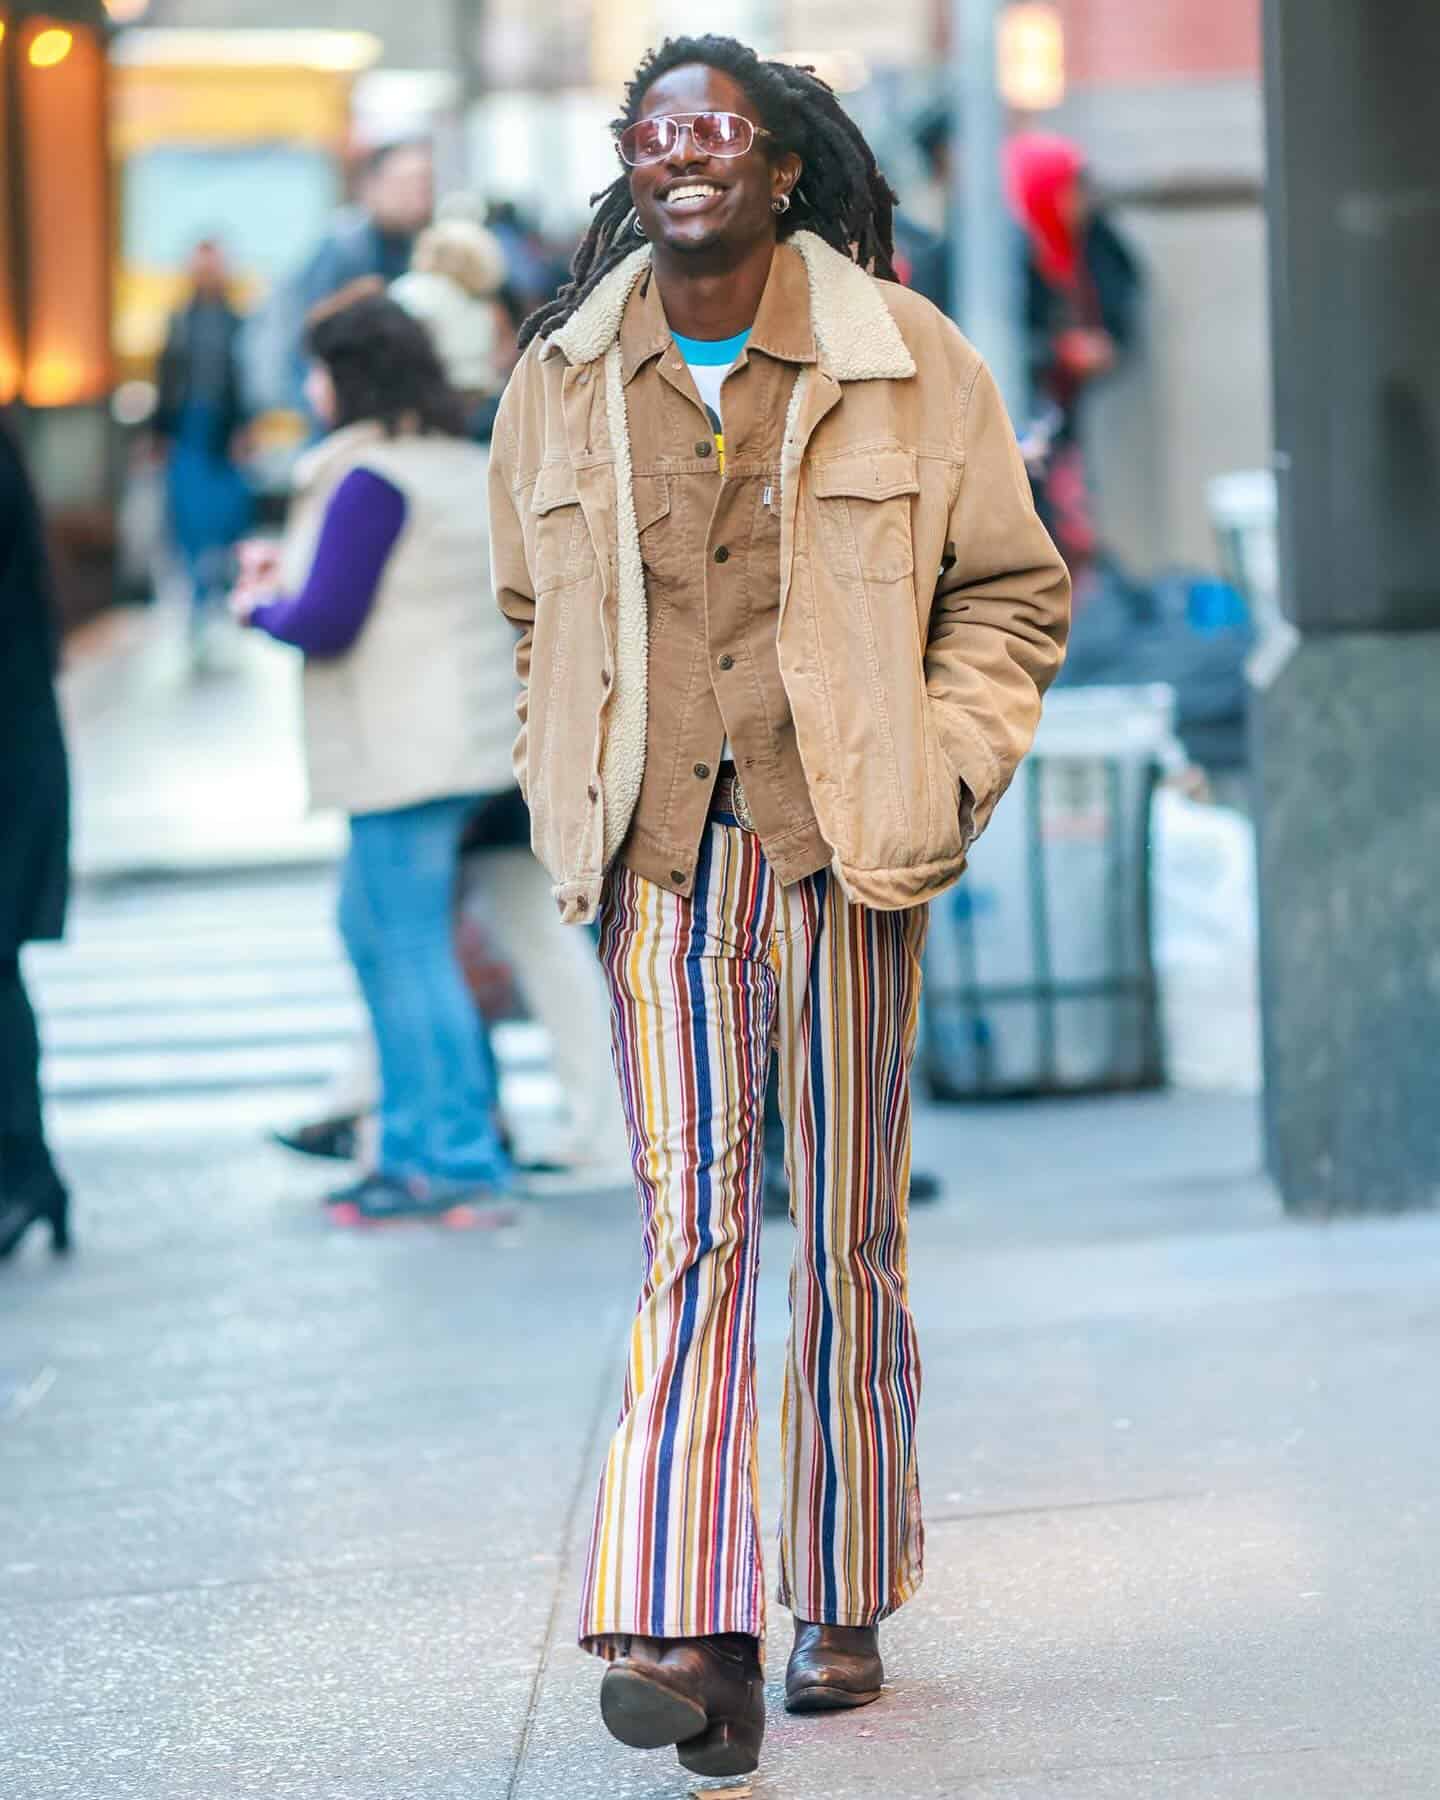 man with dreadlocks wearing a colorful stripped jeans